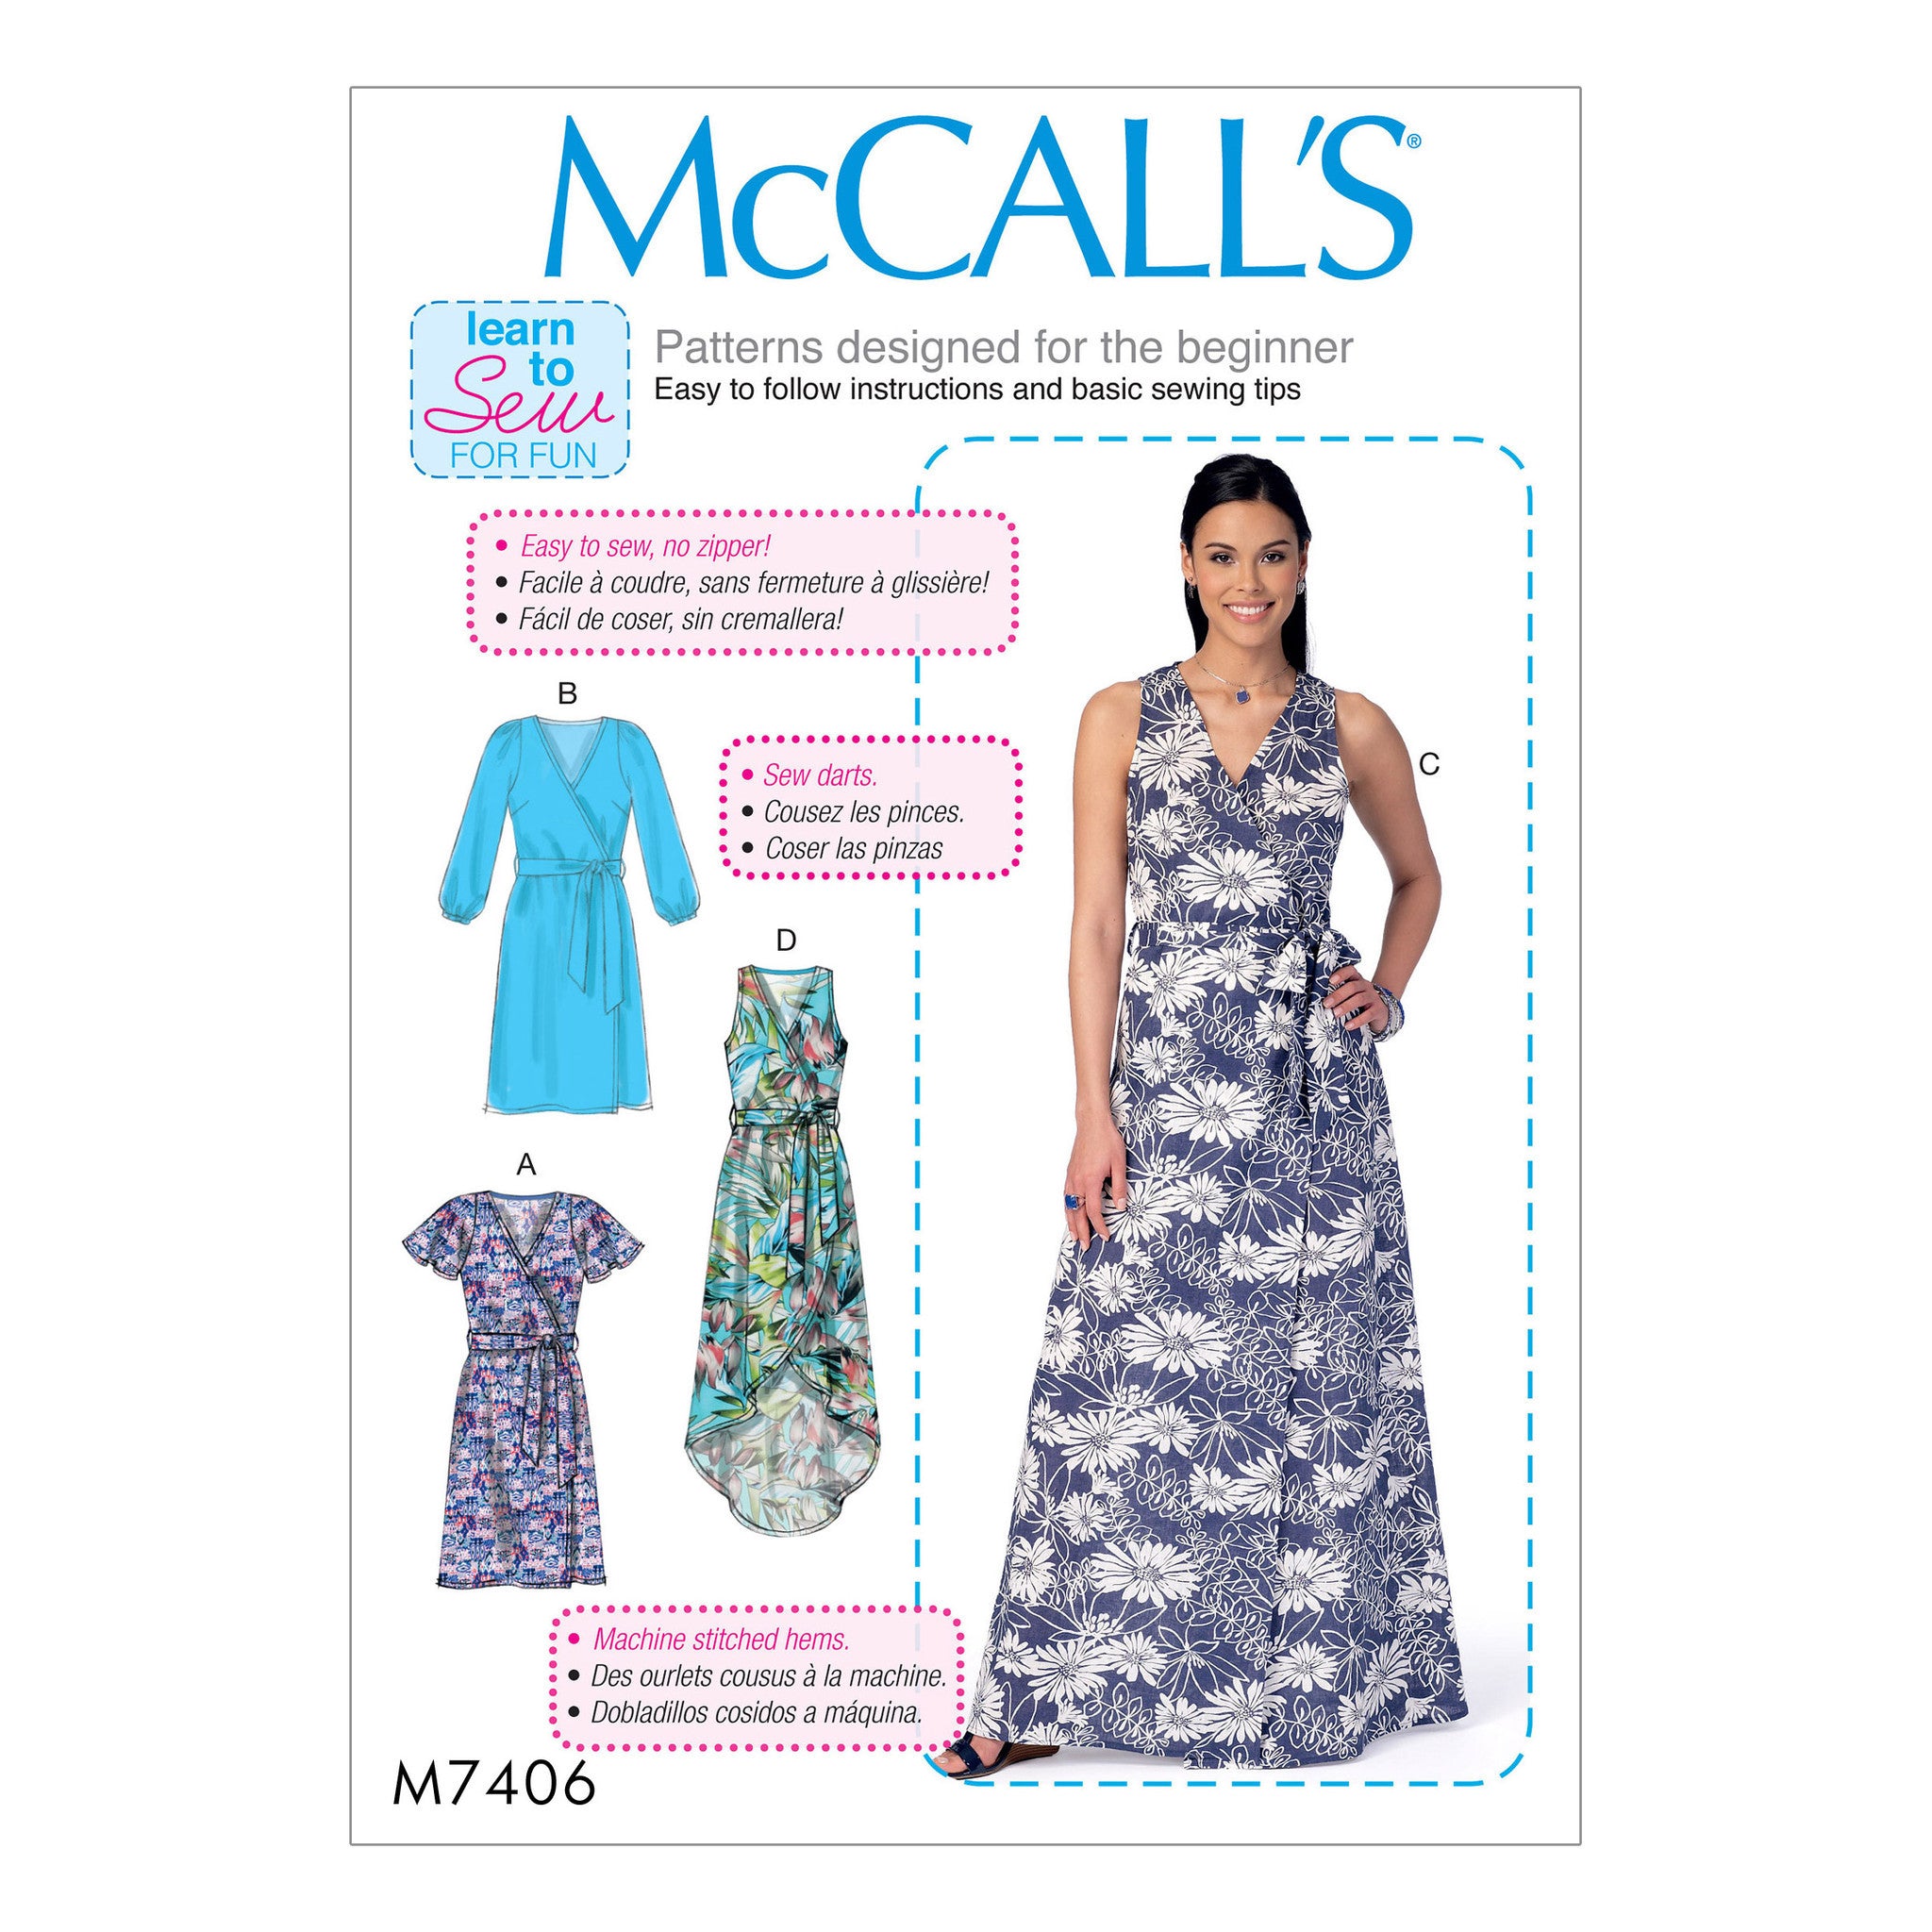 M7406 Dresses and belt McCalls pattern from Jaycotts Sewing Supplies